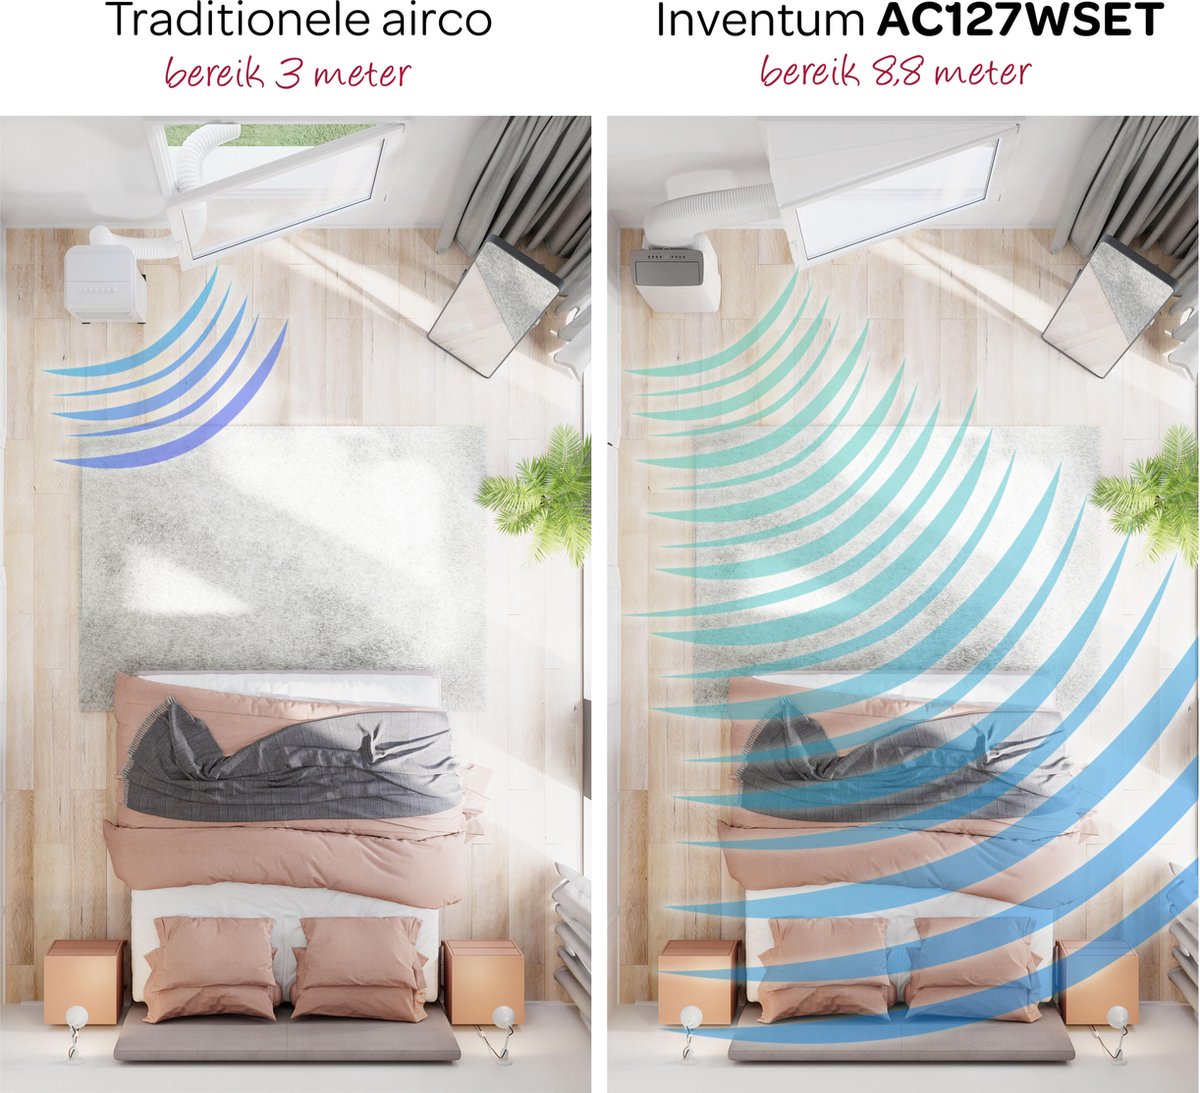 Inventum AC127WSET - Mobiele airconditioner - Airco - High performance kit  - 3-in-1... | bol